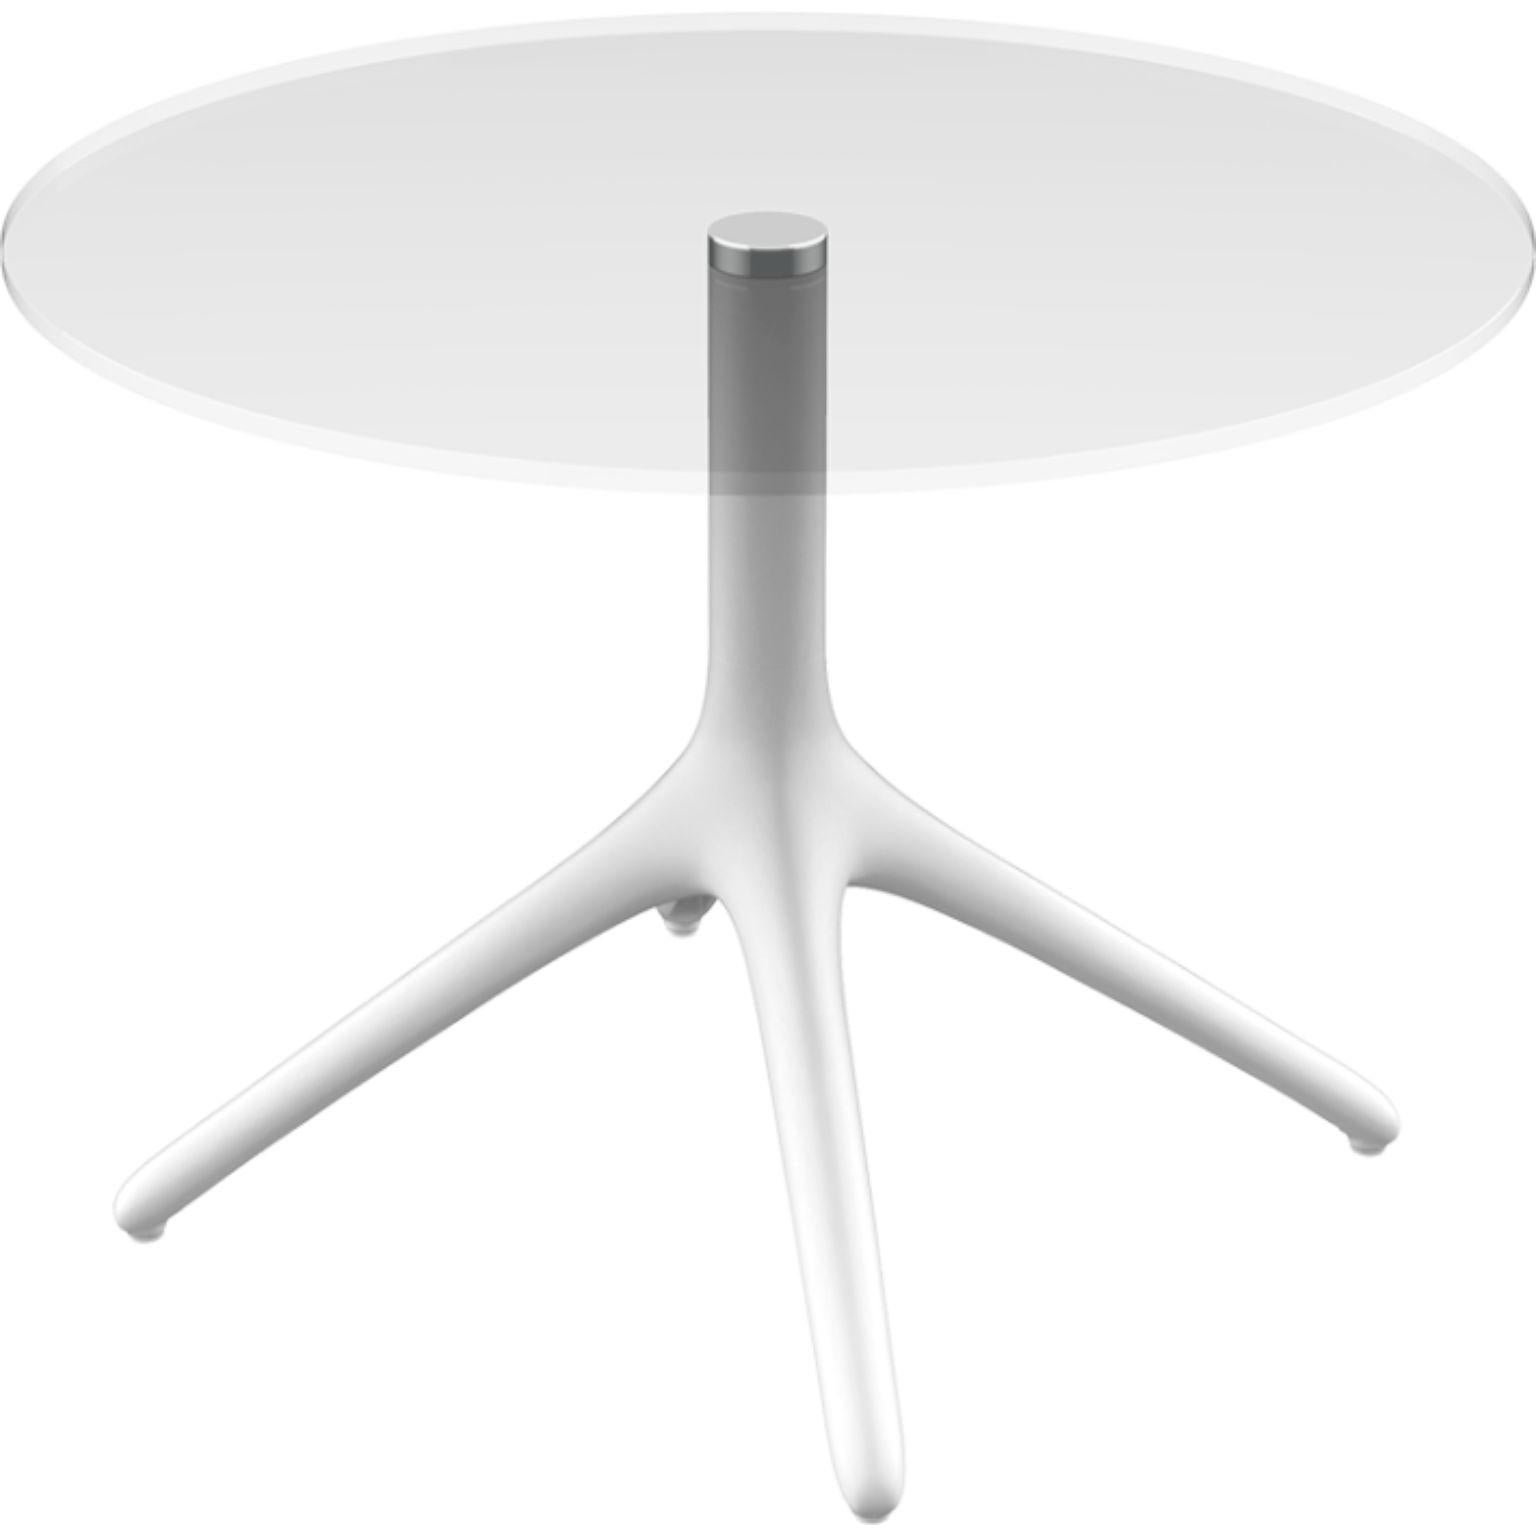 Spanish Uni Cream Table 50 by Mowee For Sale